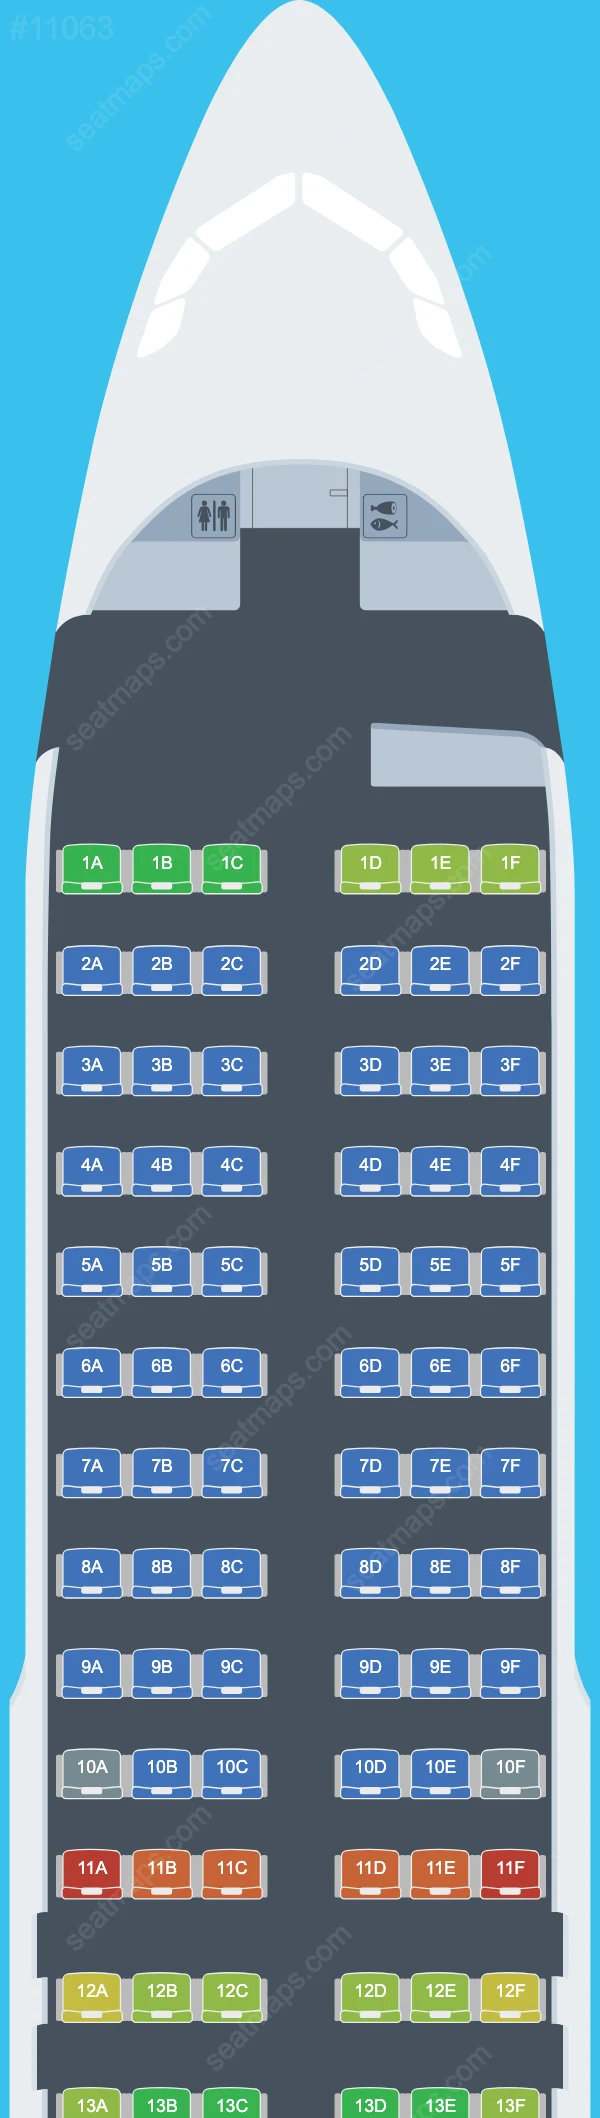 Avianca Airbus A320 Seat Maps A320-200 V.2